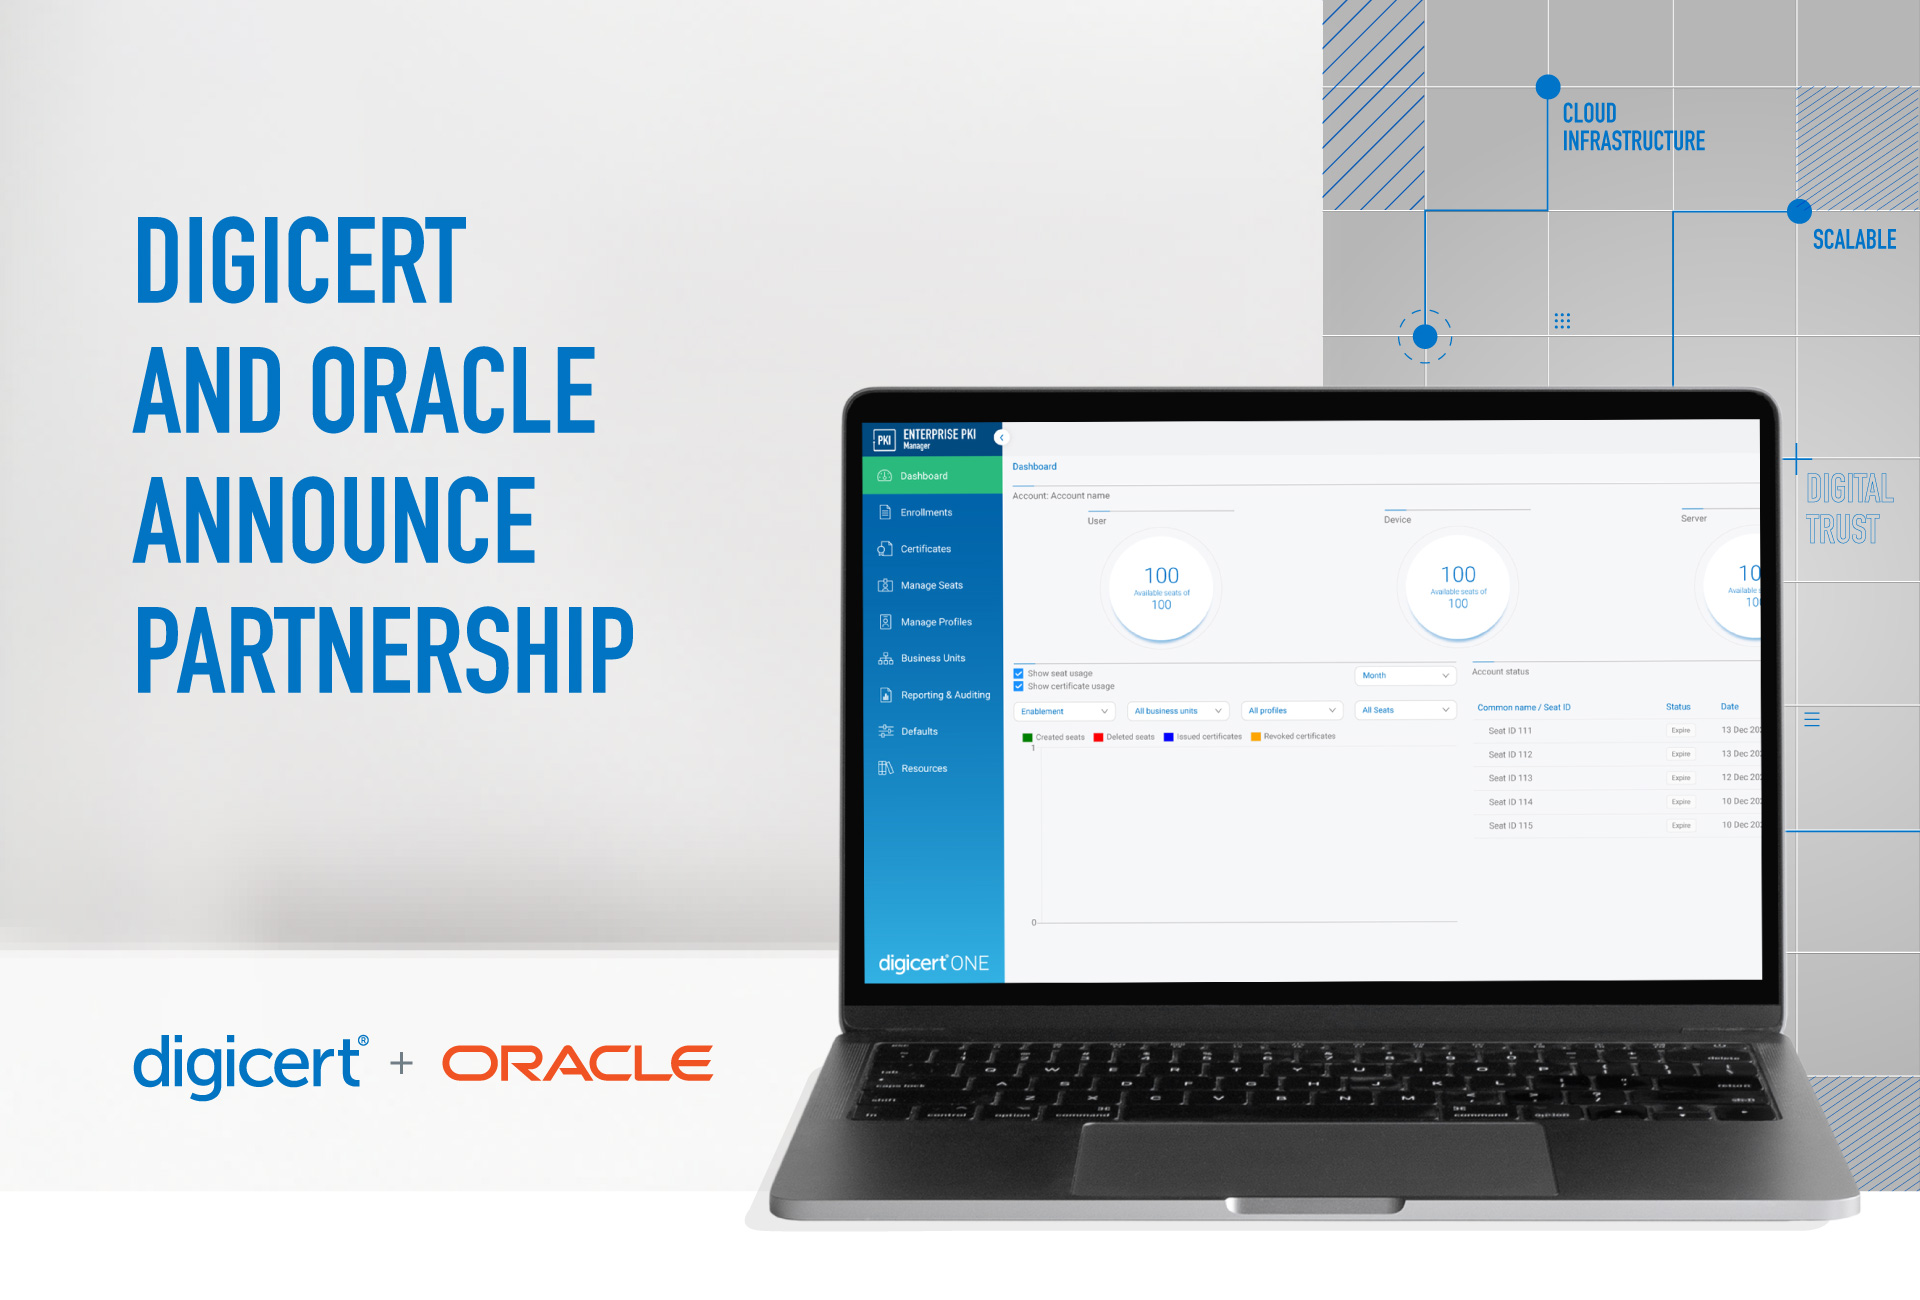 DigiCert announces partnership with Oracle to make DigiCert® ONE available  on Oracle Cloud Infrastructure